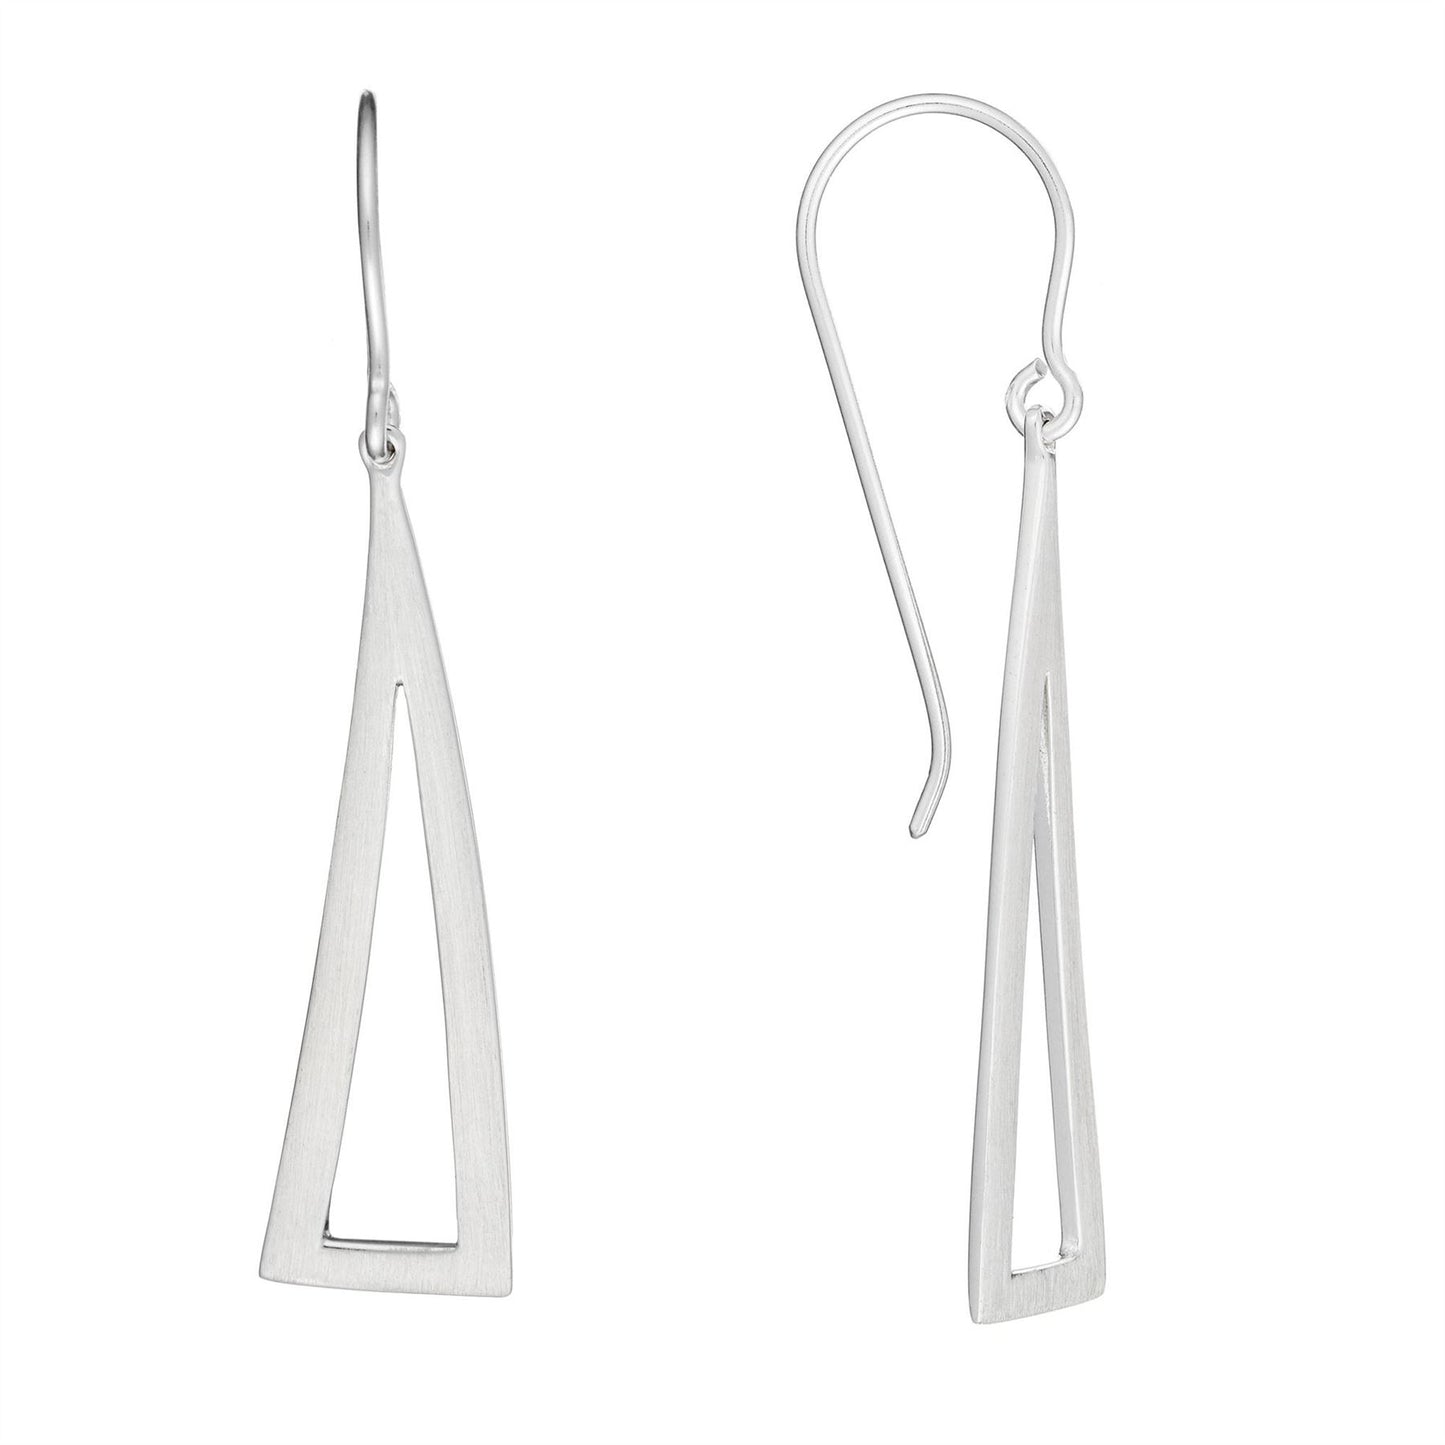 Sterling Silver Contemporary Geometric Triangle Set - Silverly